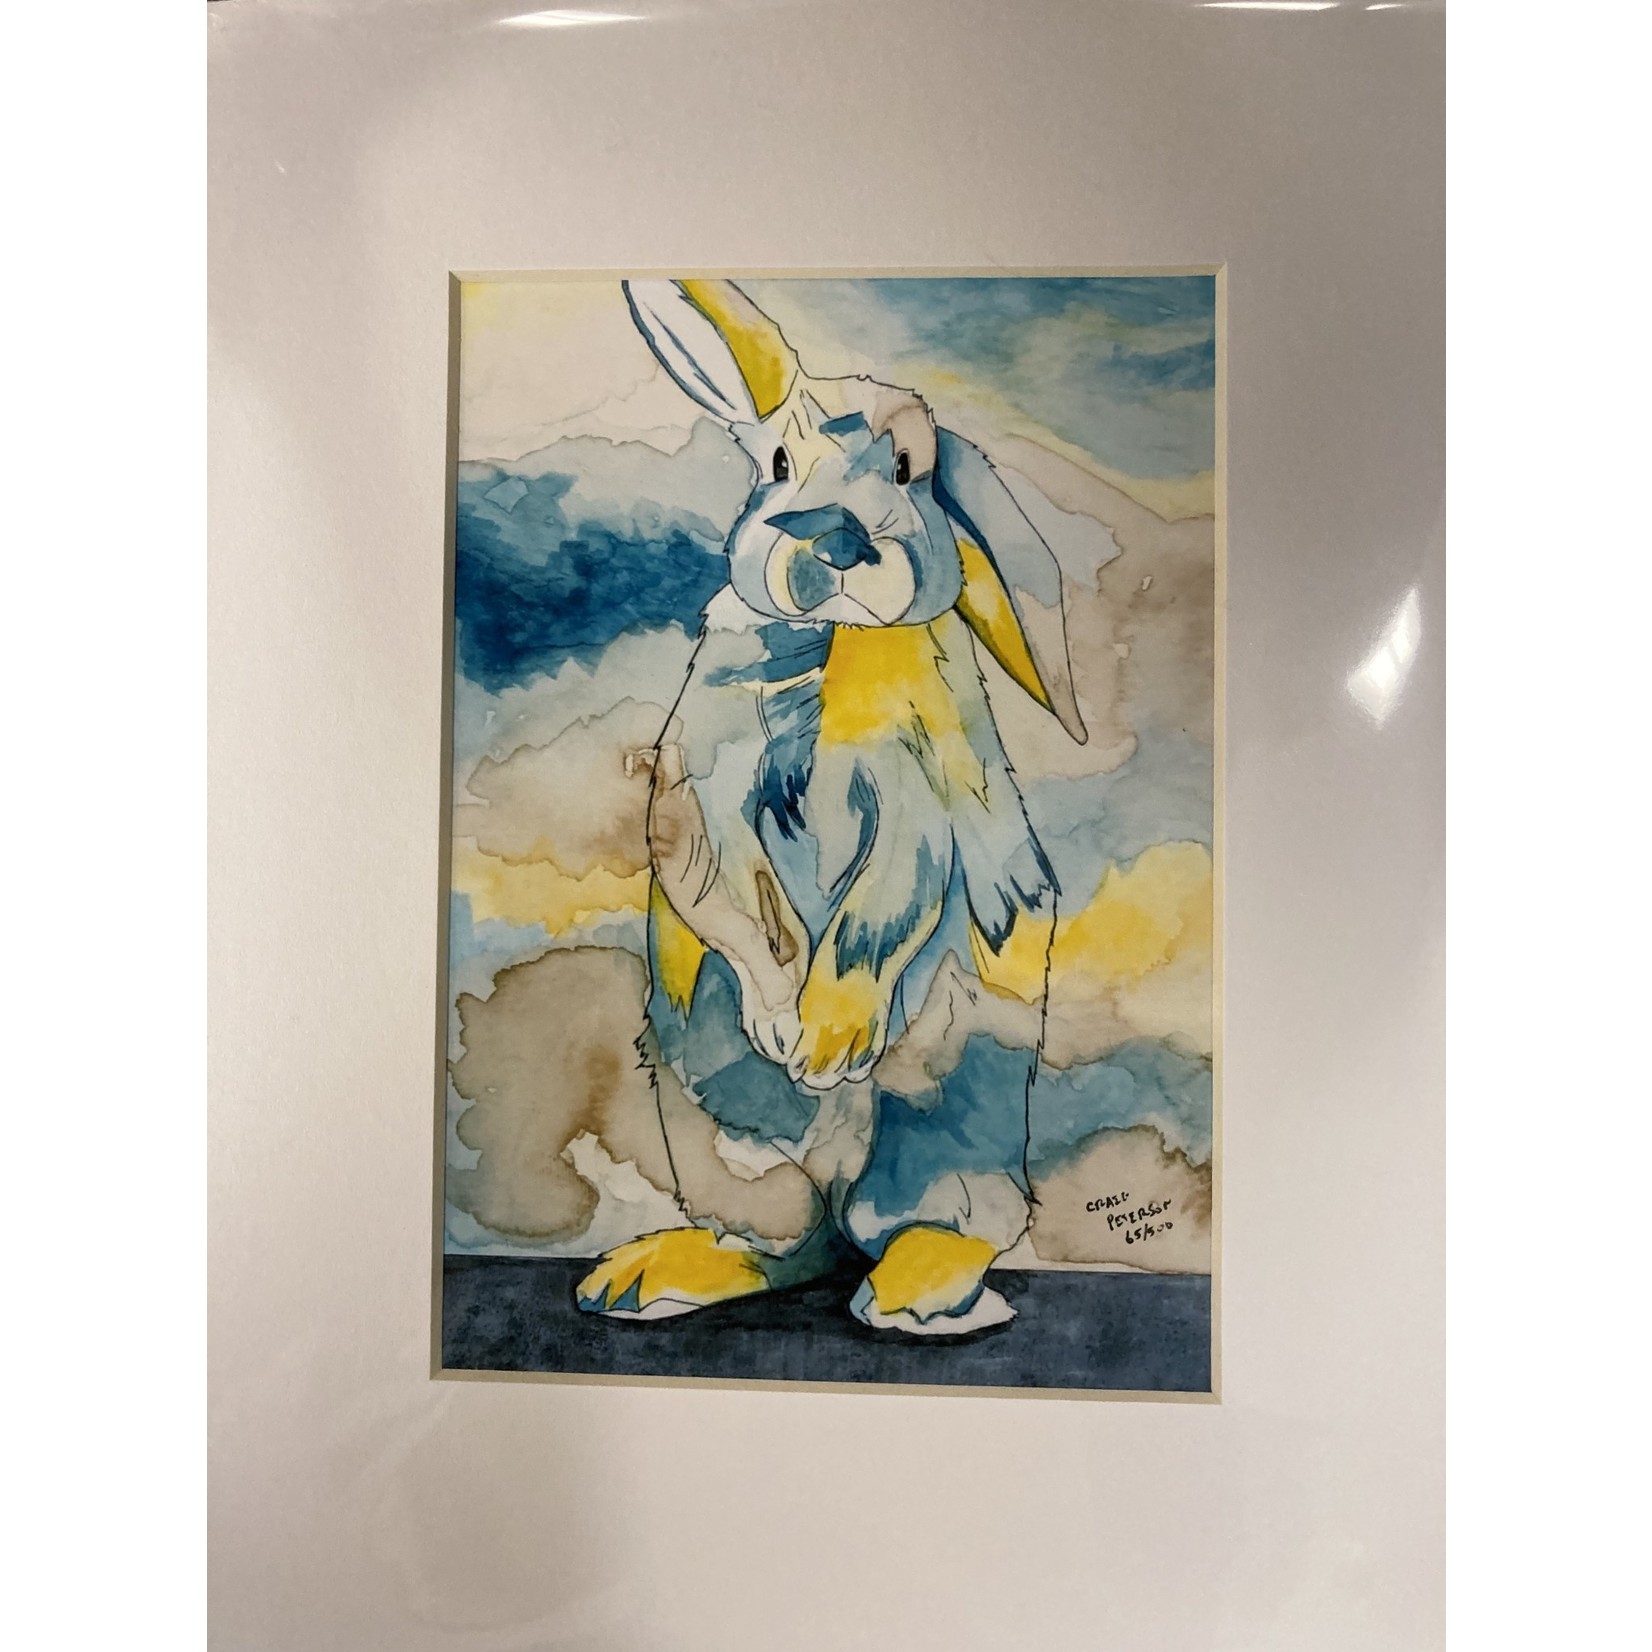 Craig Peterson Craig Peterson | Blue & yellow bunny coffee stain watercolor